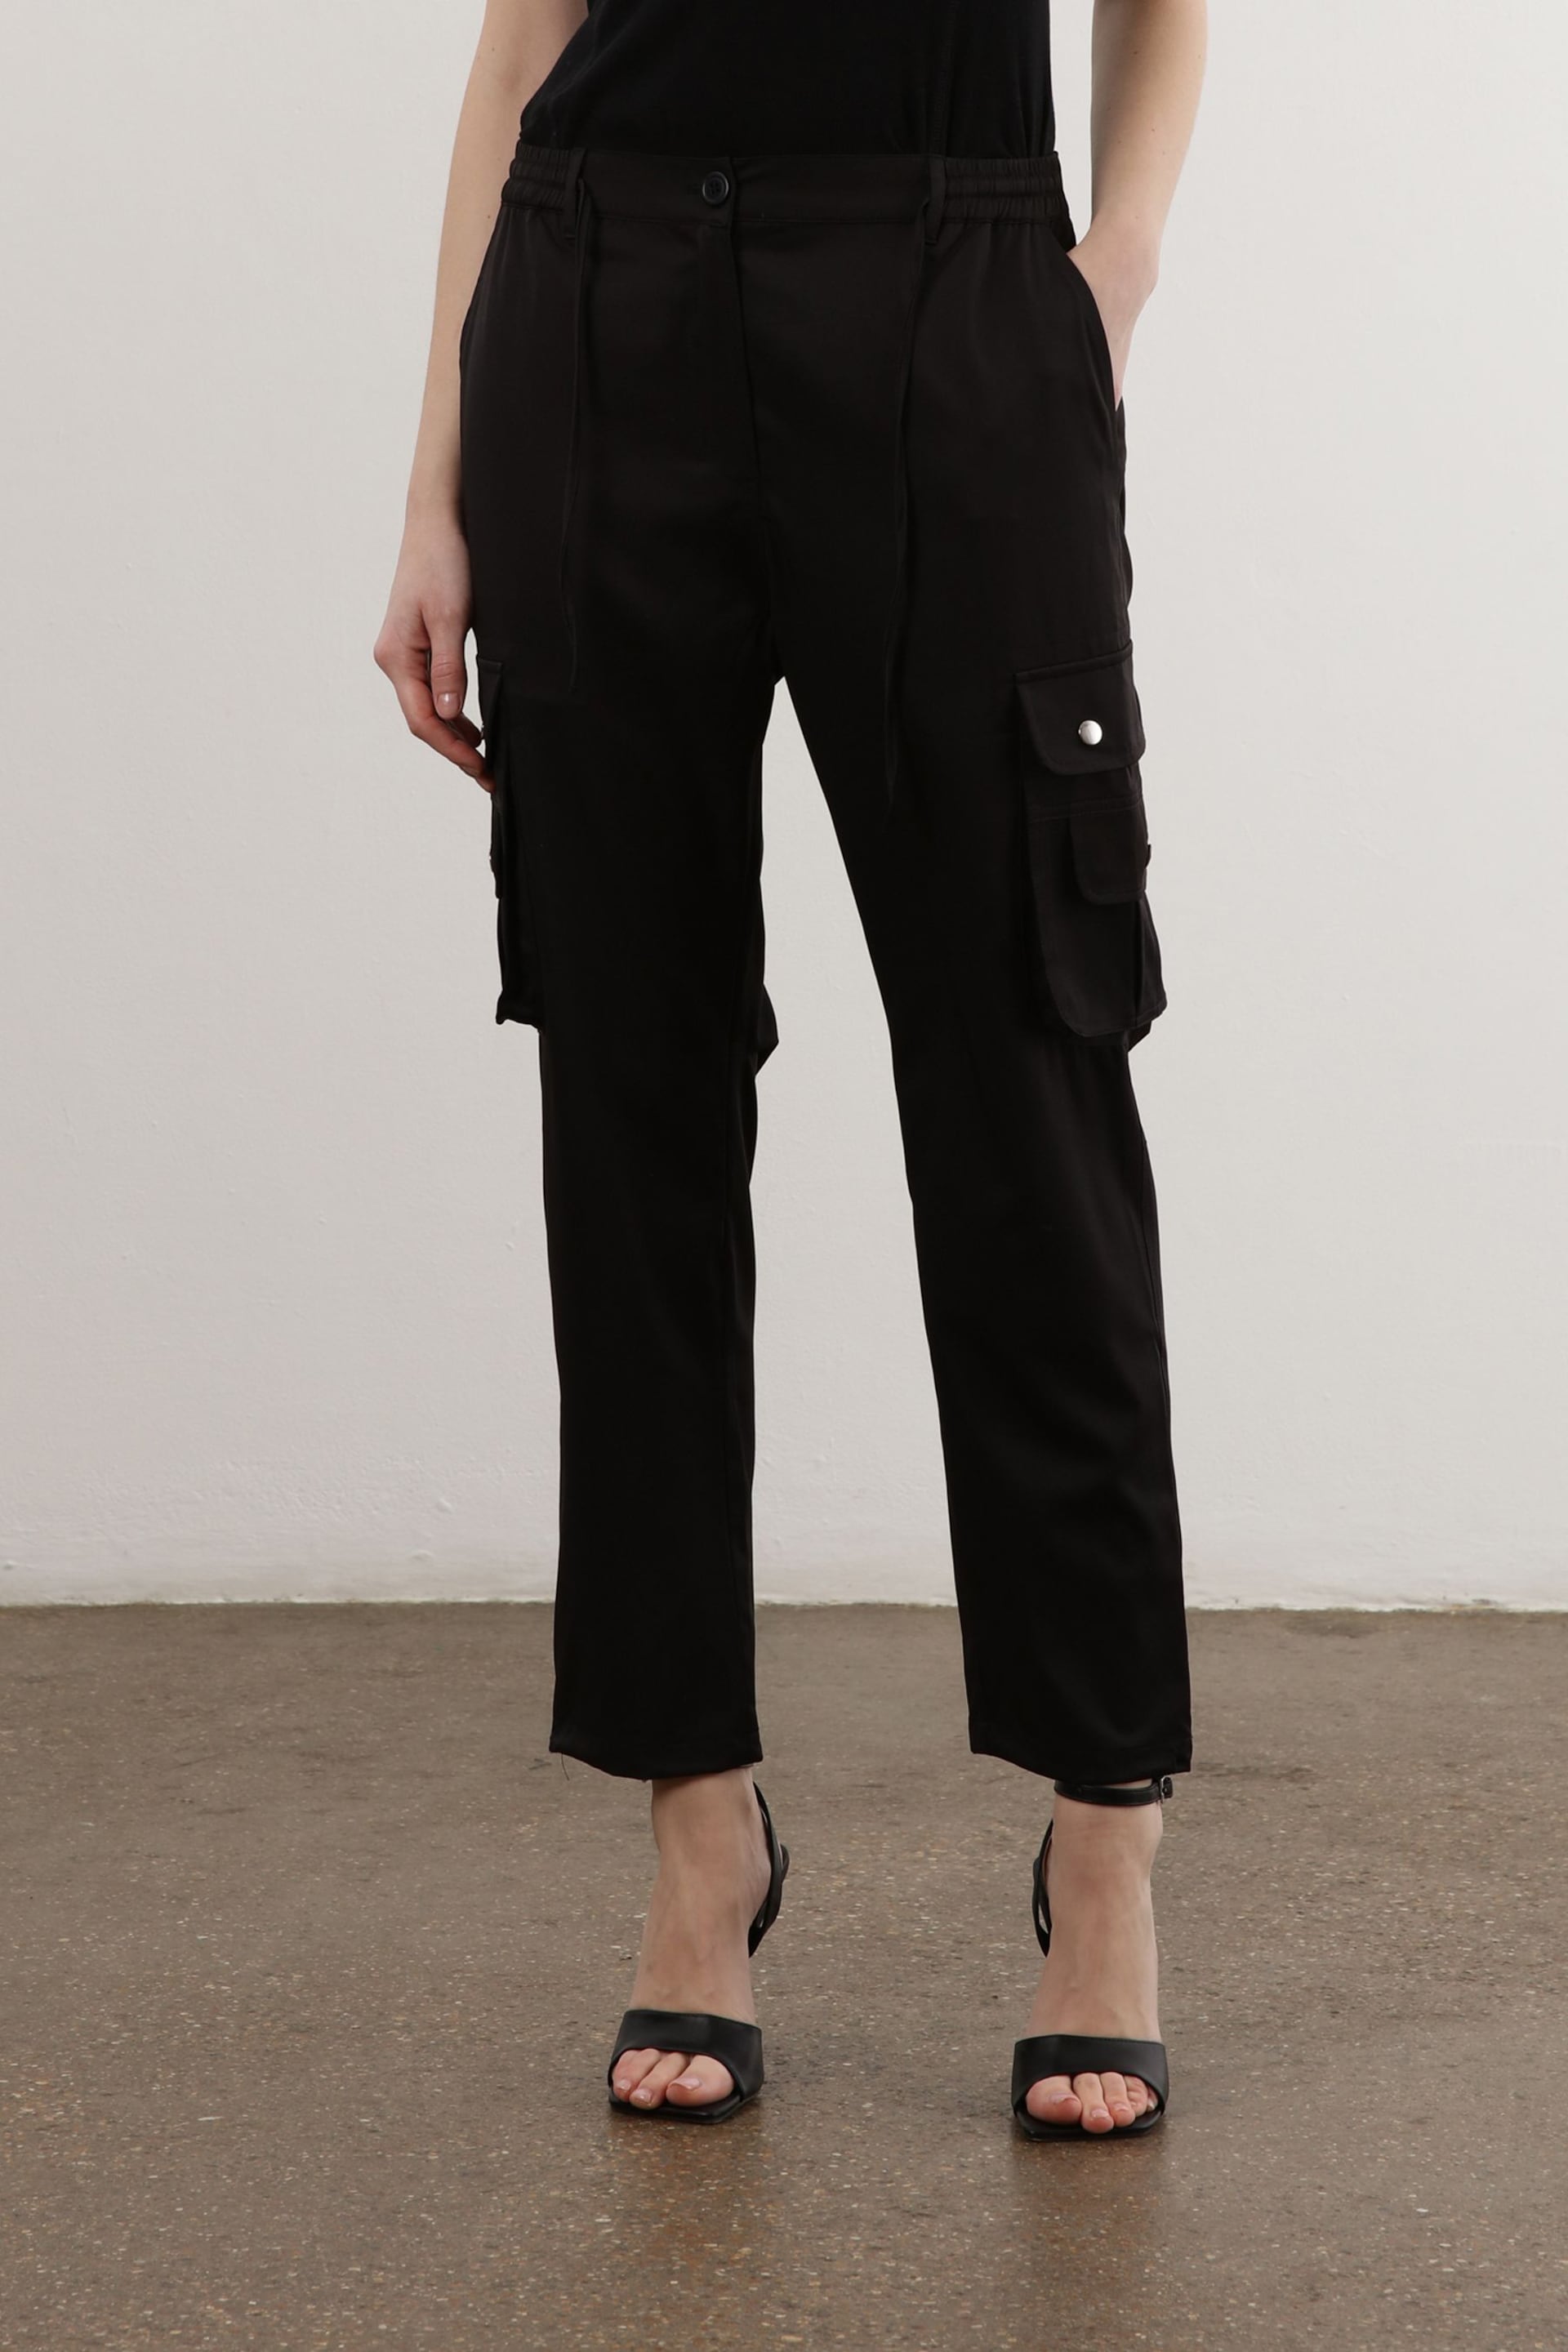 Religion Black Utility Inspired Trouser With Multiple Pockets In Soft Crepe - Image 1 of 5